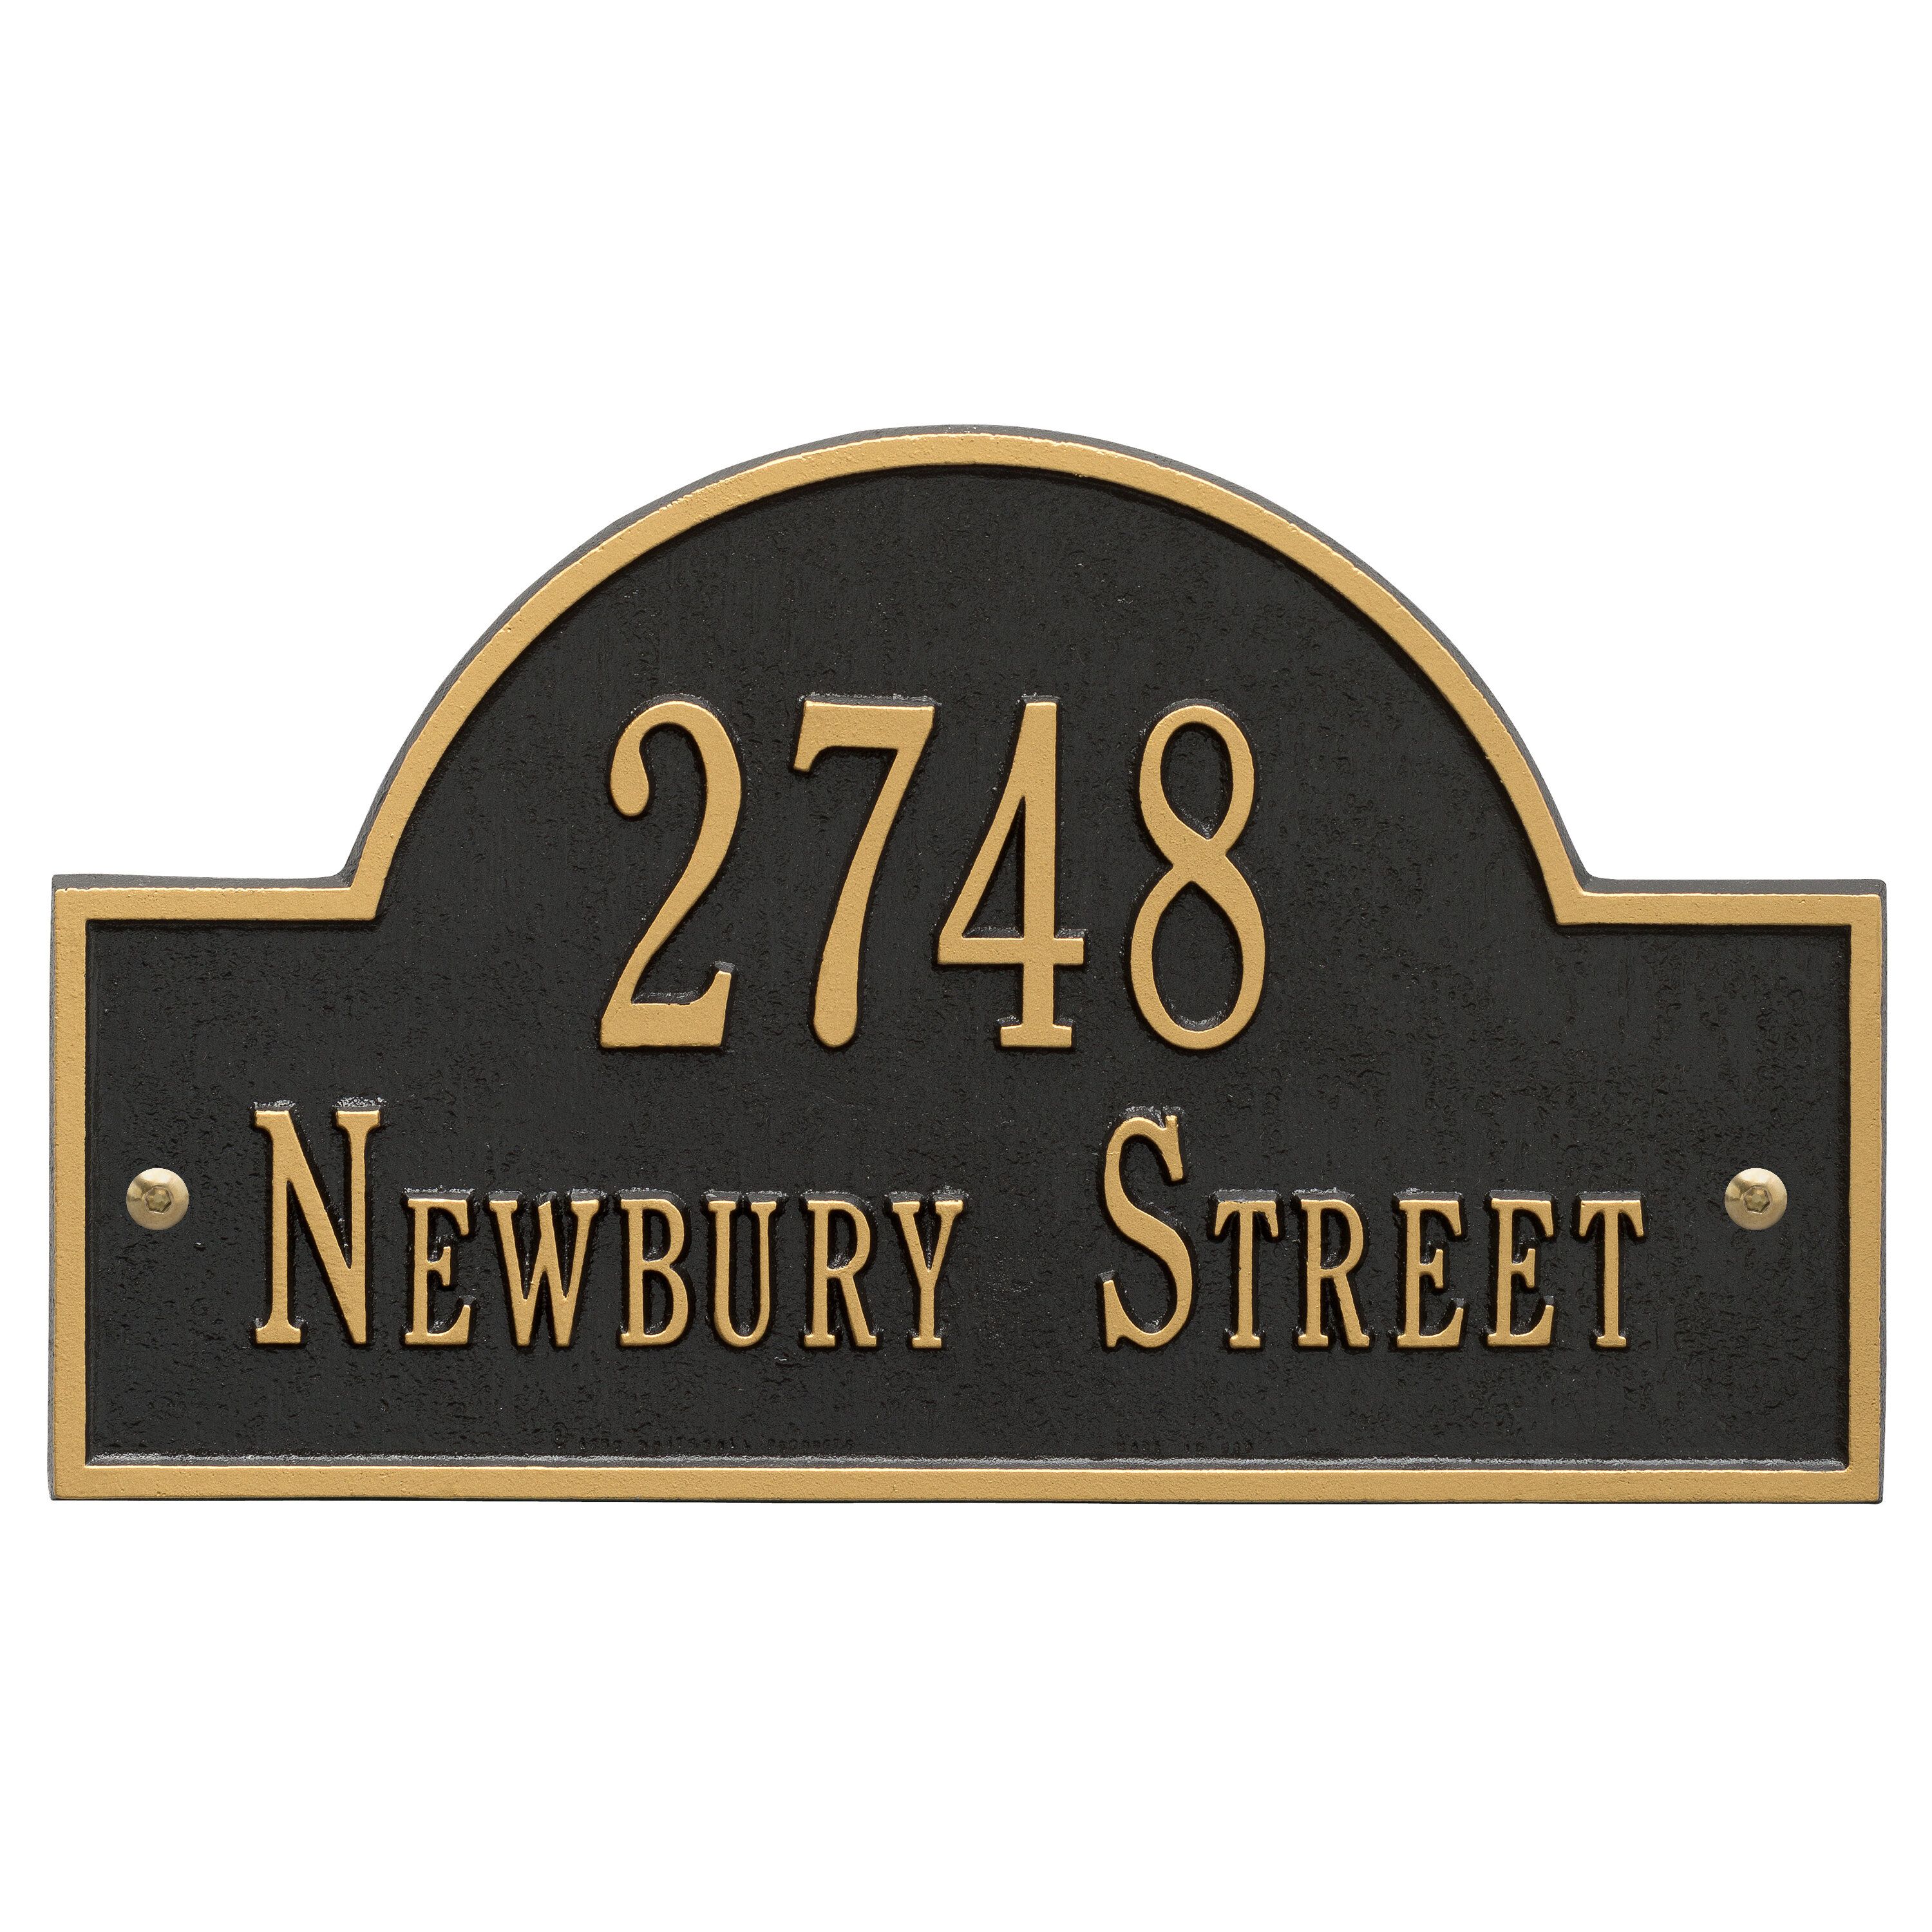 Whitehall Arch Marker - Standard Wall - Two Line Address Plaque